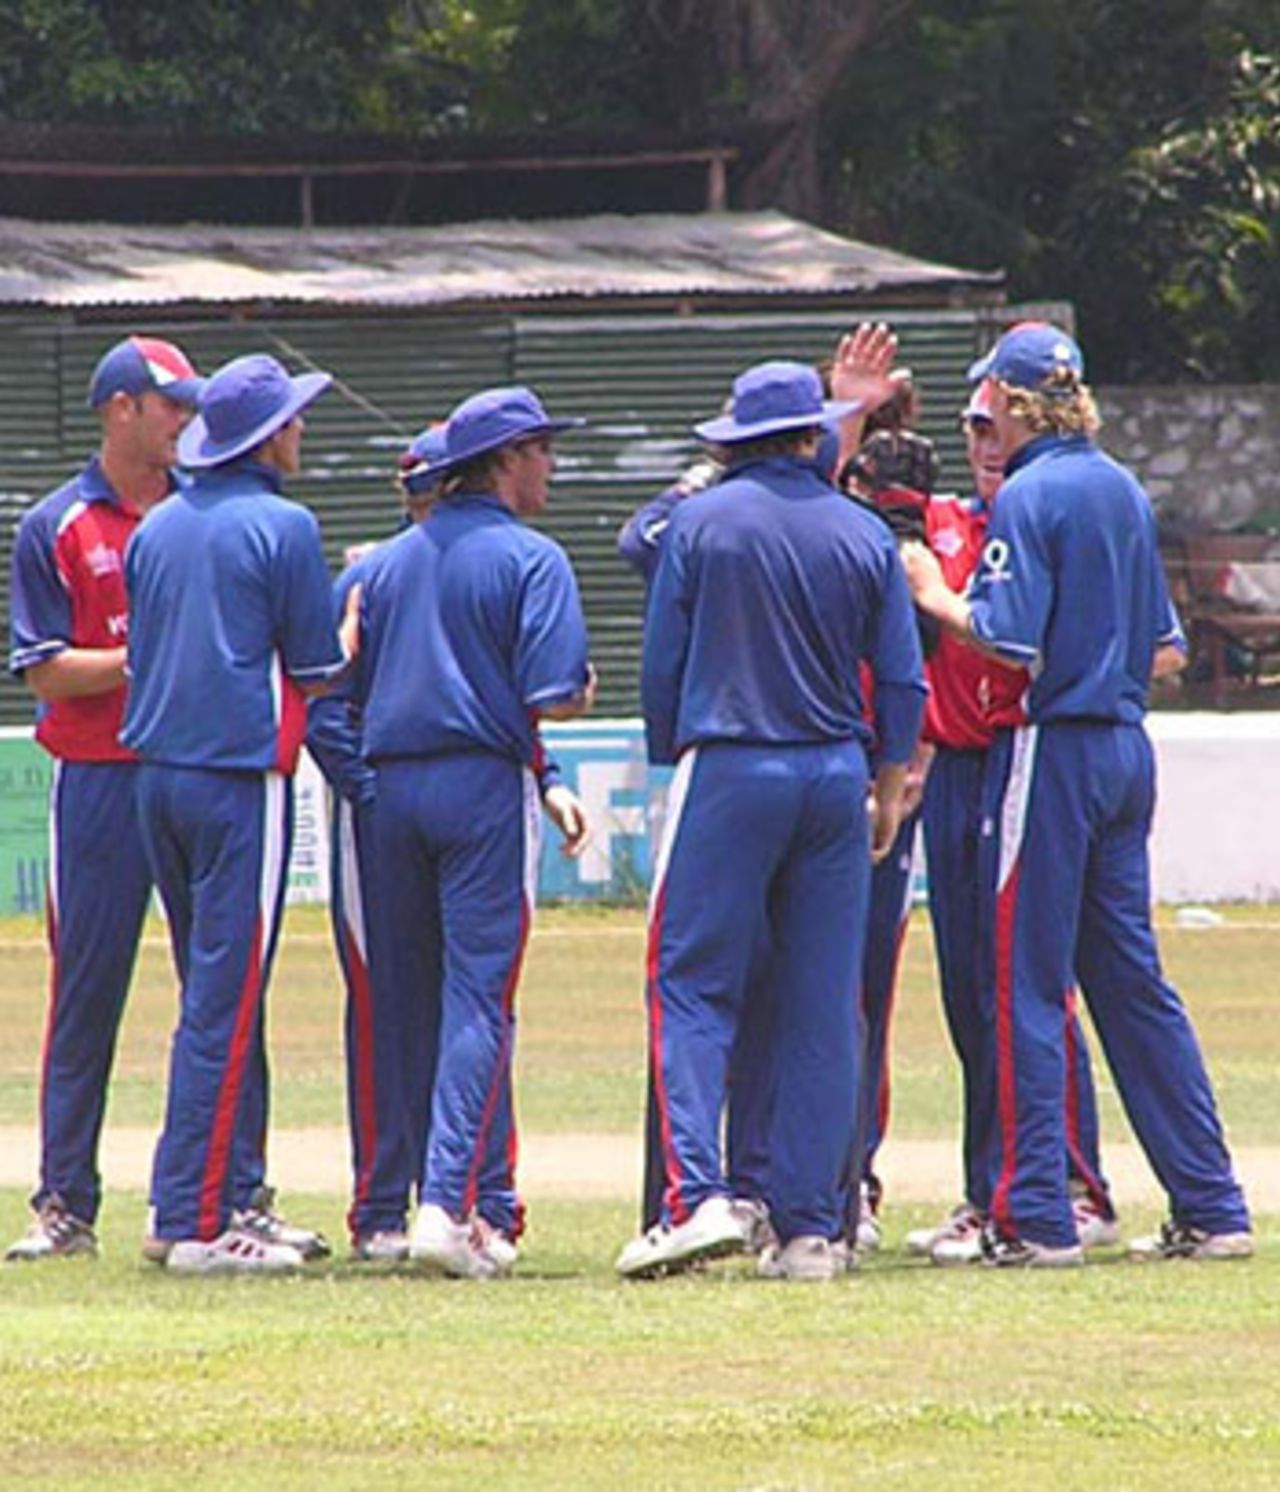 England A gather round after taking a wicket against Pakistan A, Colombo, March 23, 2005